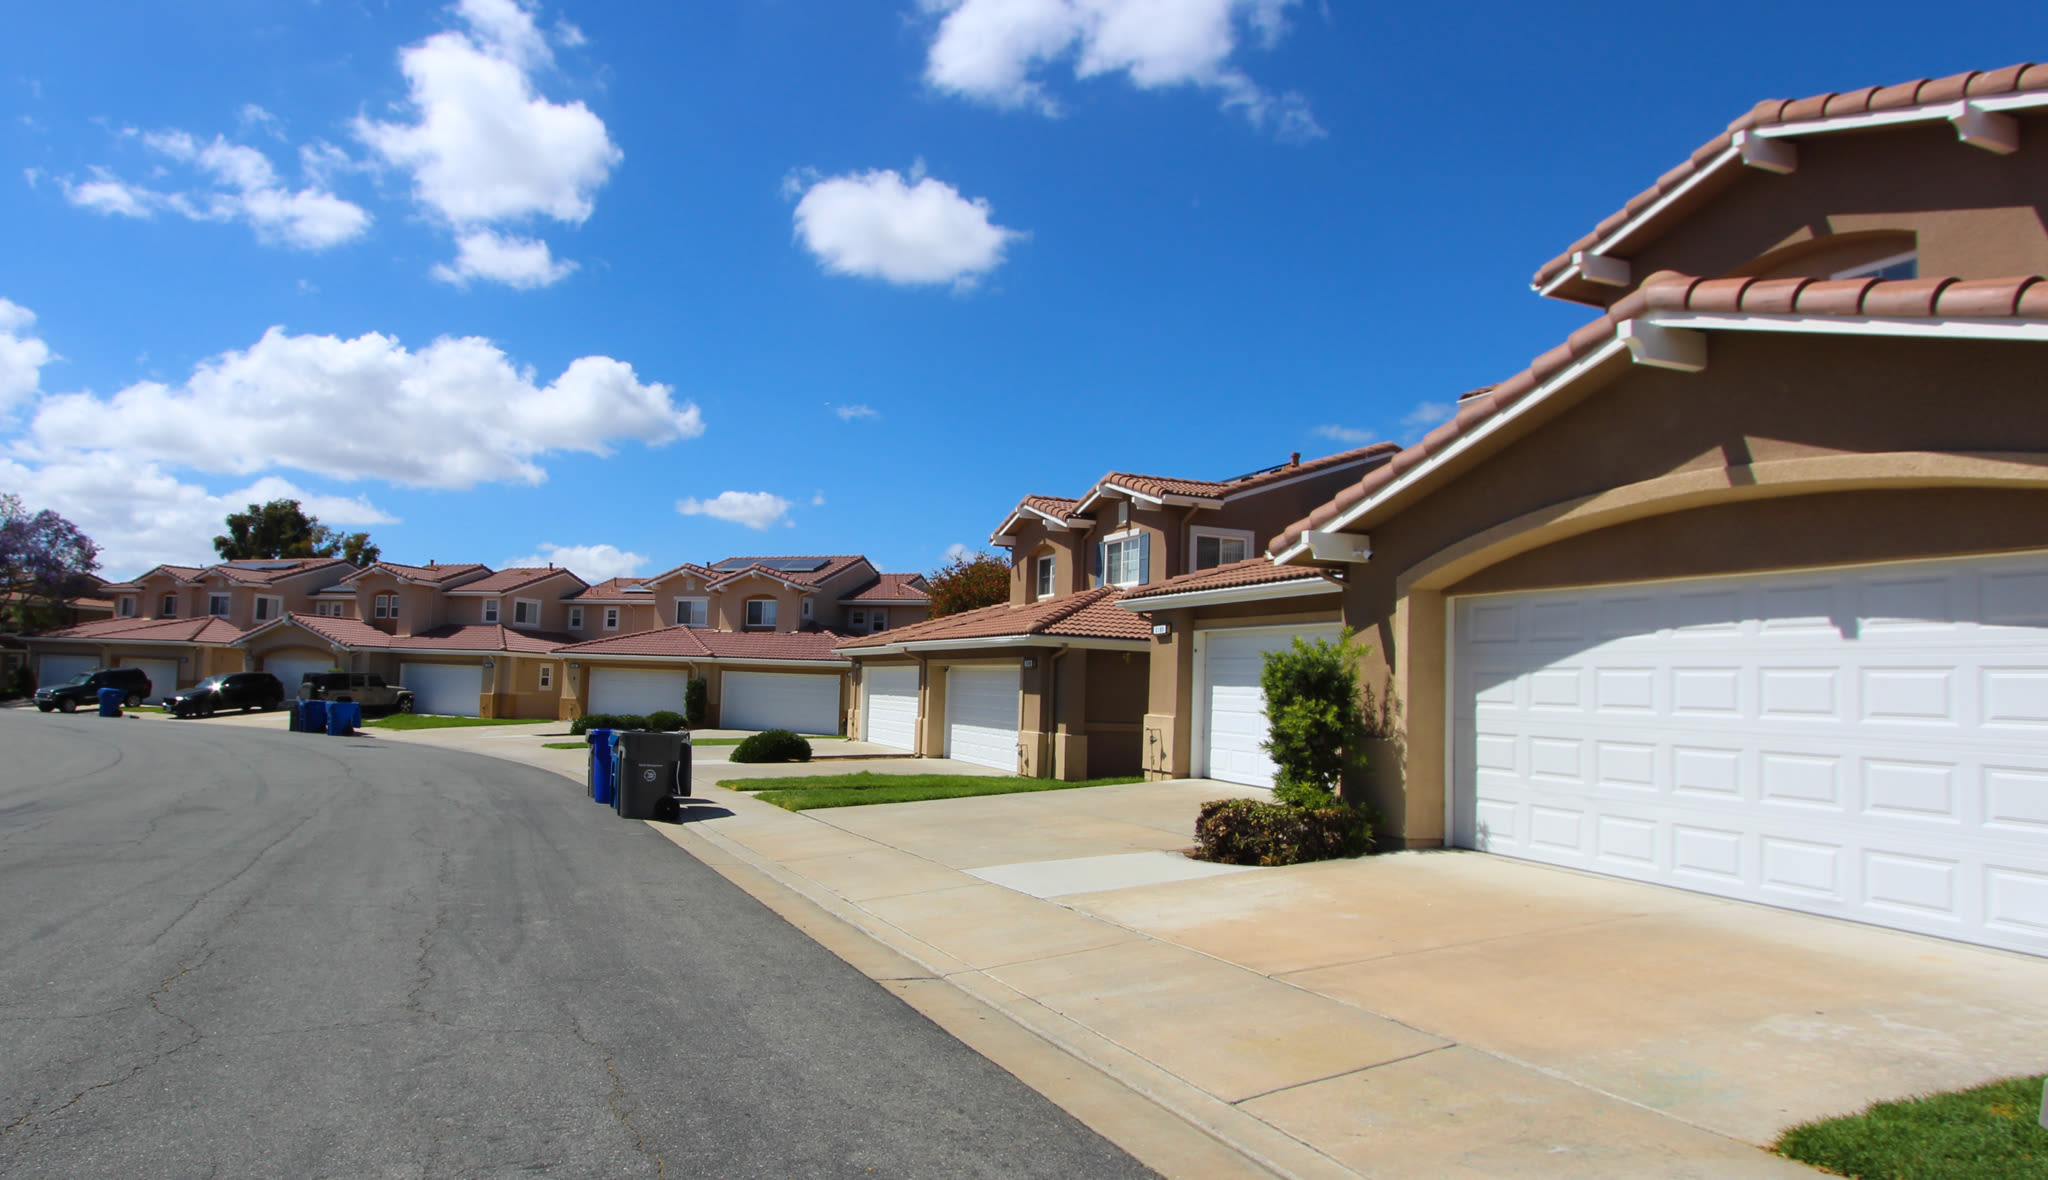 Exterior of homes with attached garages at Chollas Heights in San Diego, California